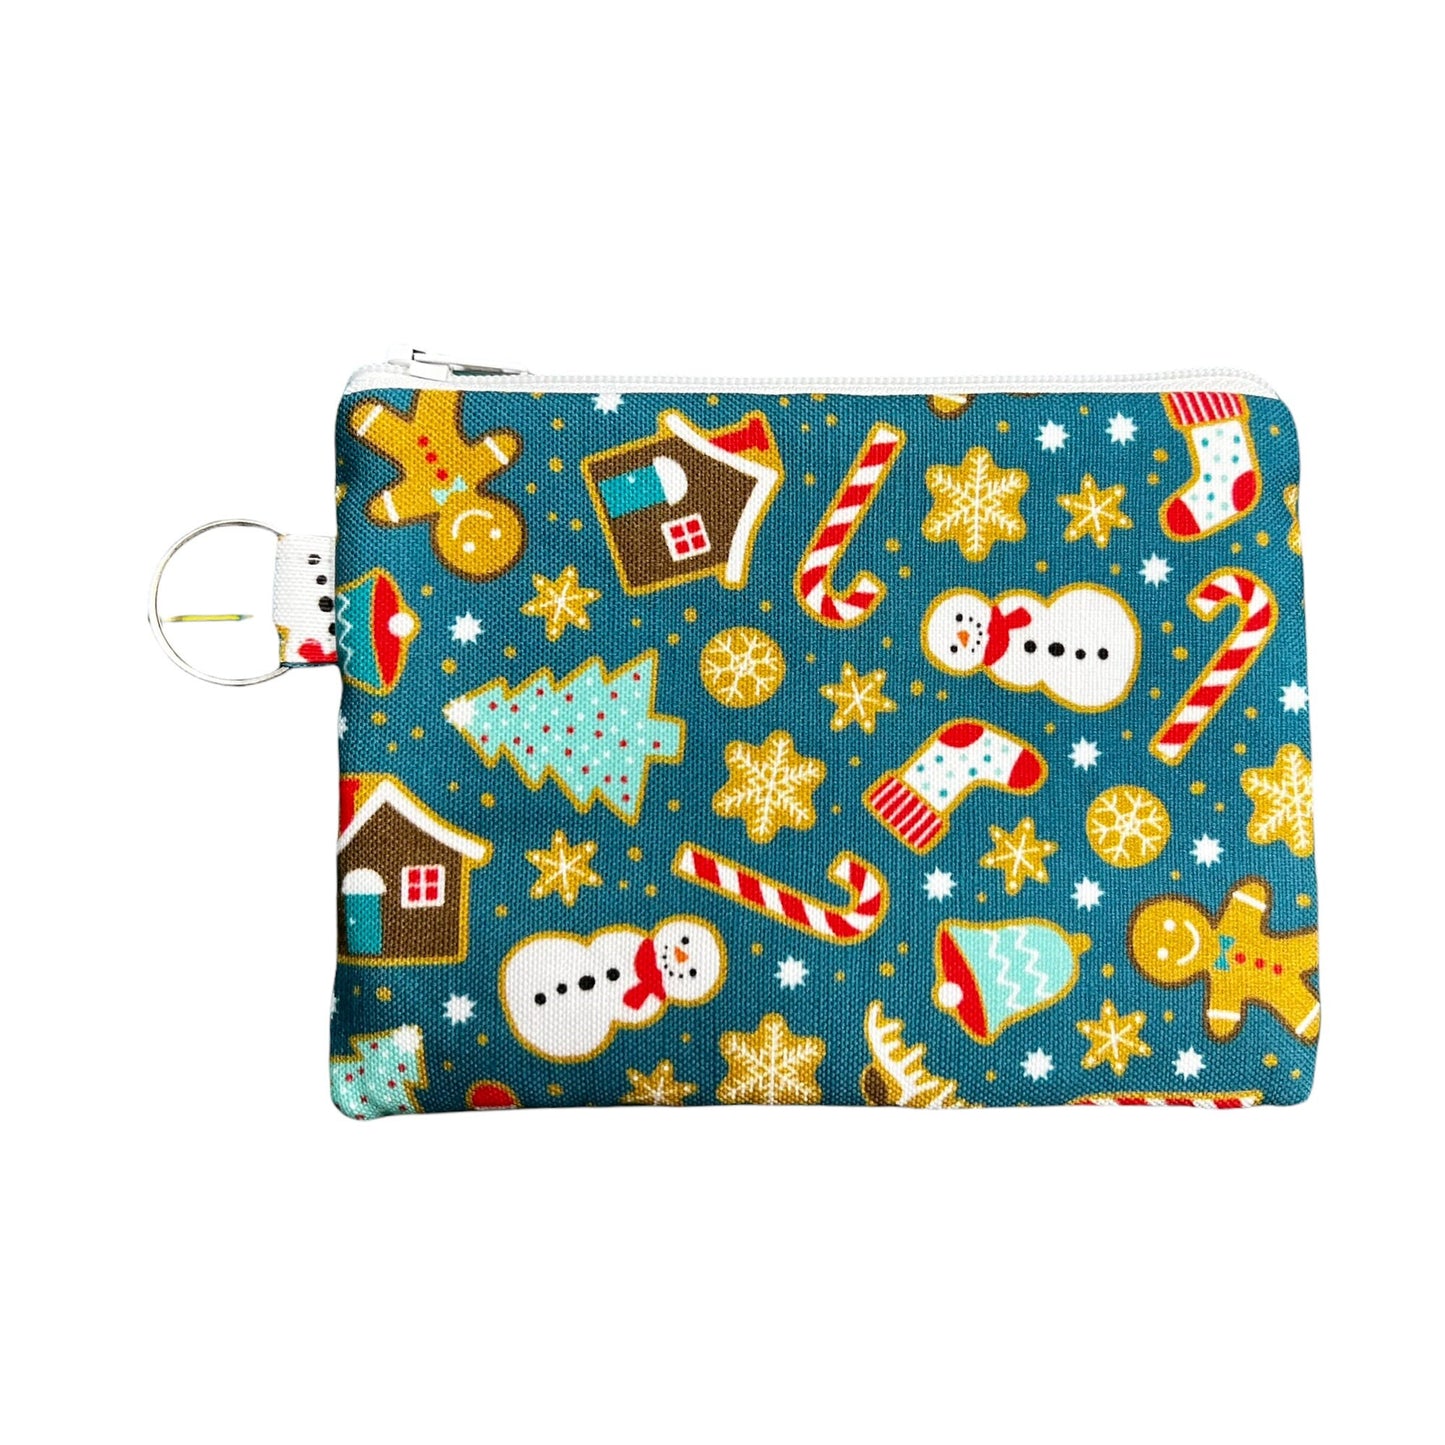 Christmas themed coin purse, Holiday zipper pouch, 6" x 4.5" zipper pouch, gift pouch, eco-friendly gift wrap